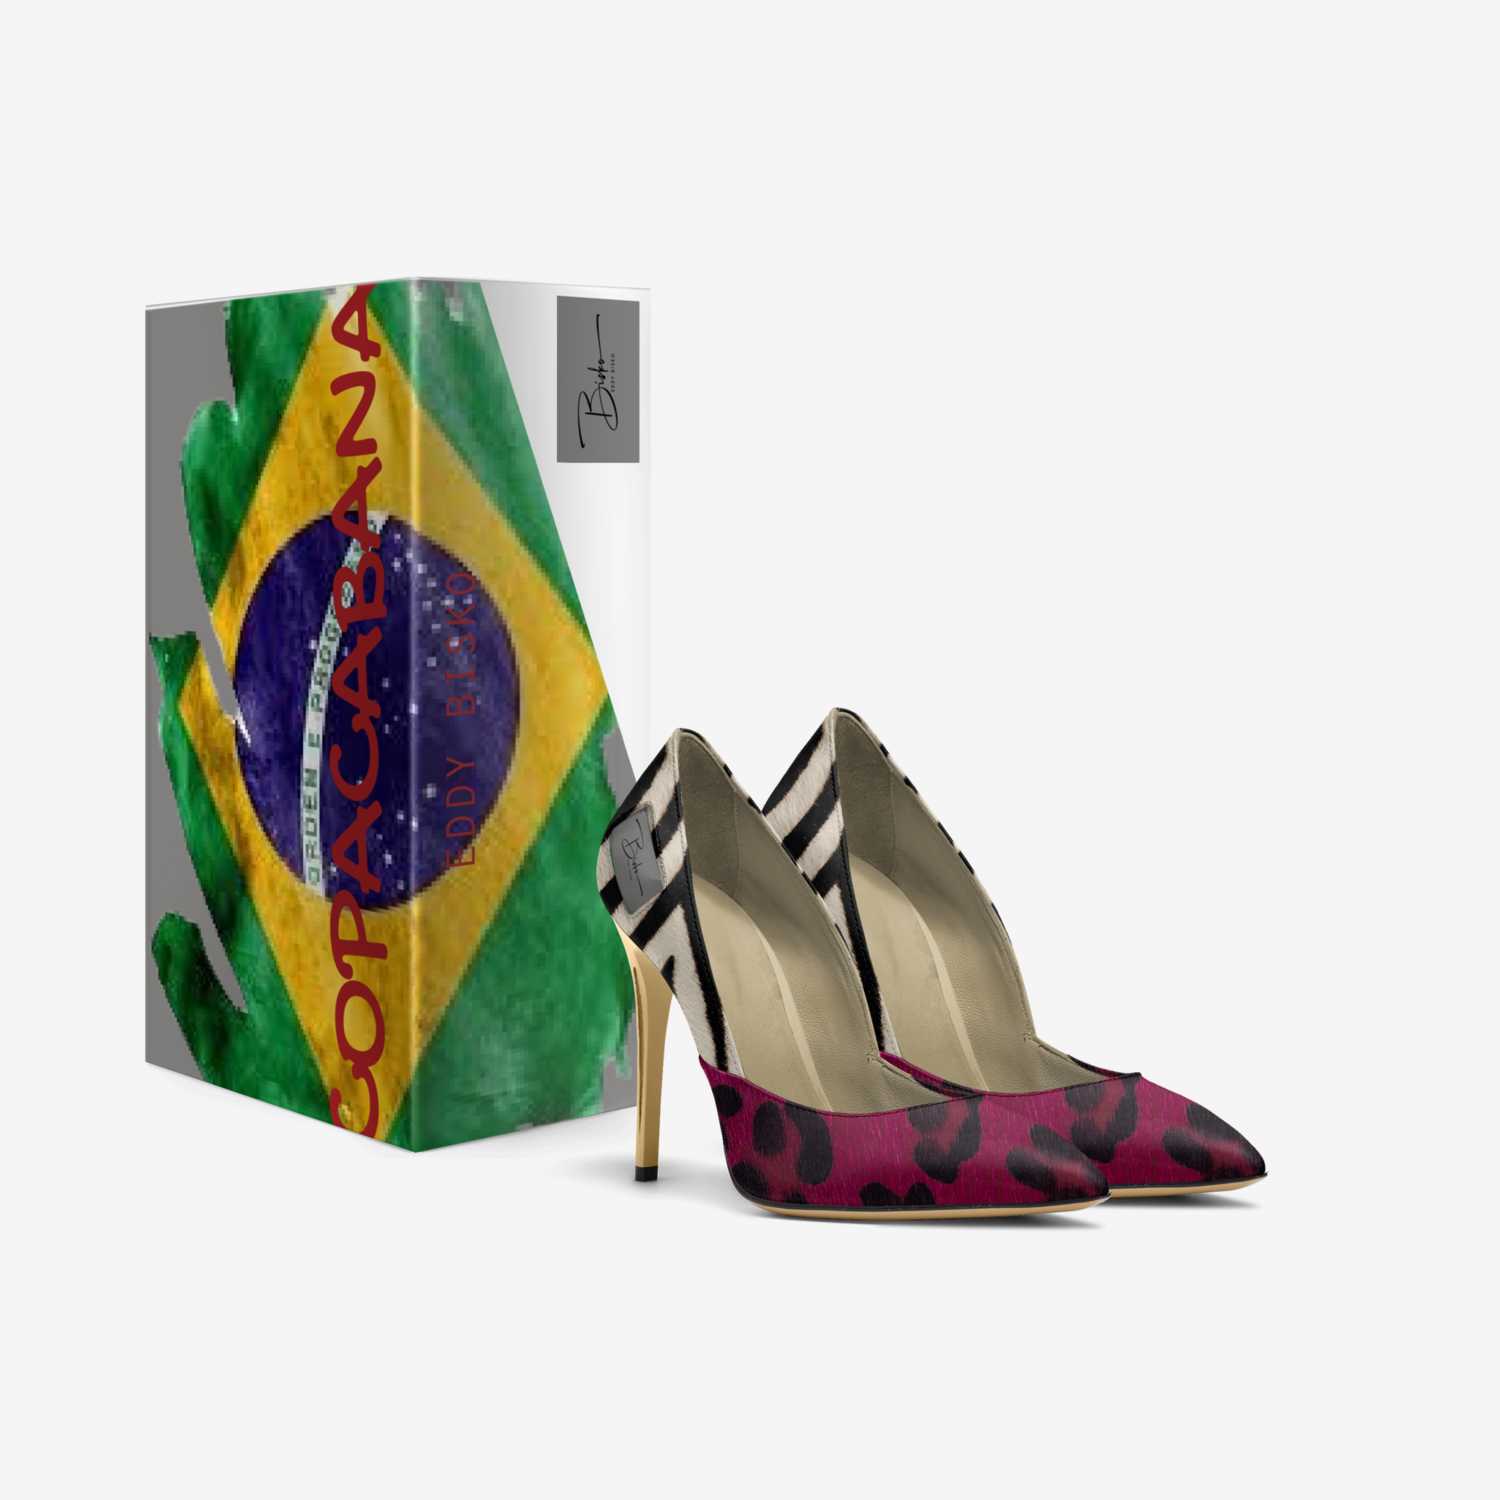 COPACABANA custom made in Italy shoes by Eddy Gérard Biscaut | Box view